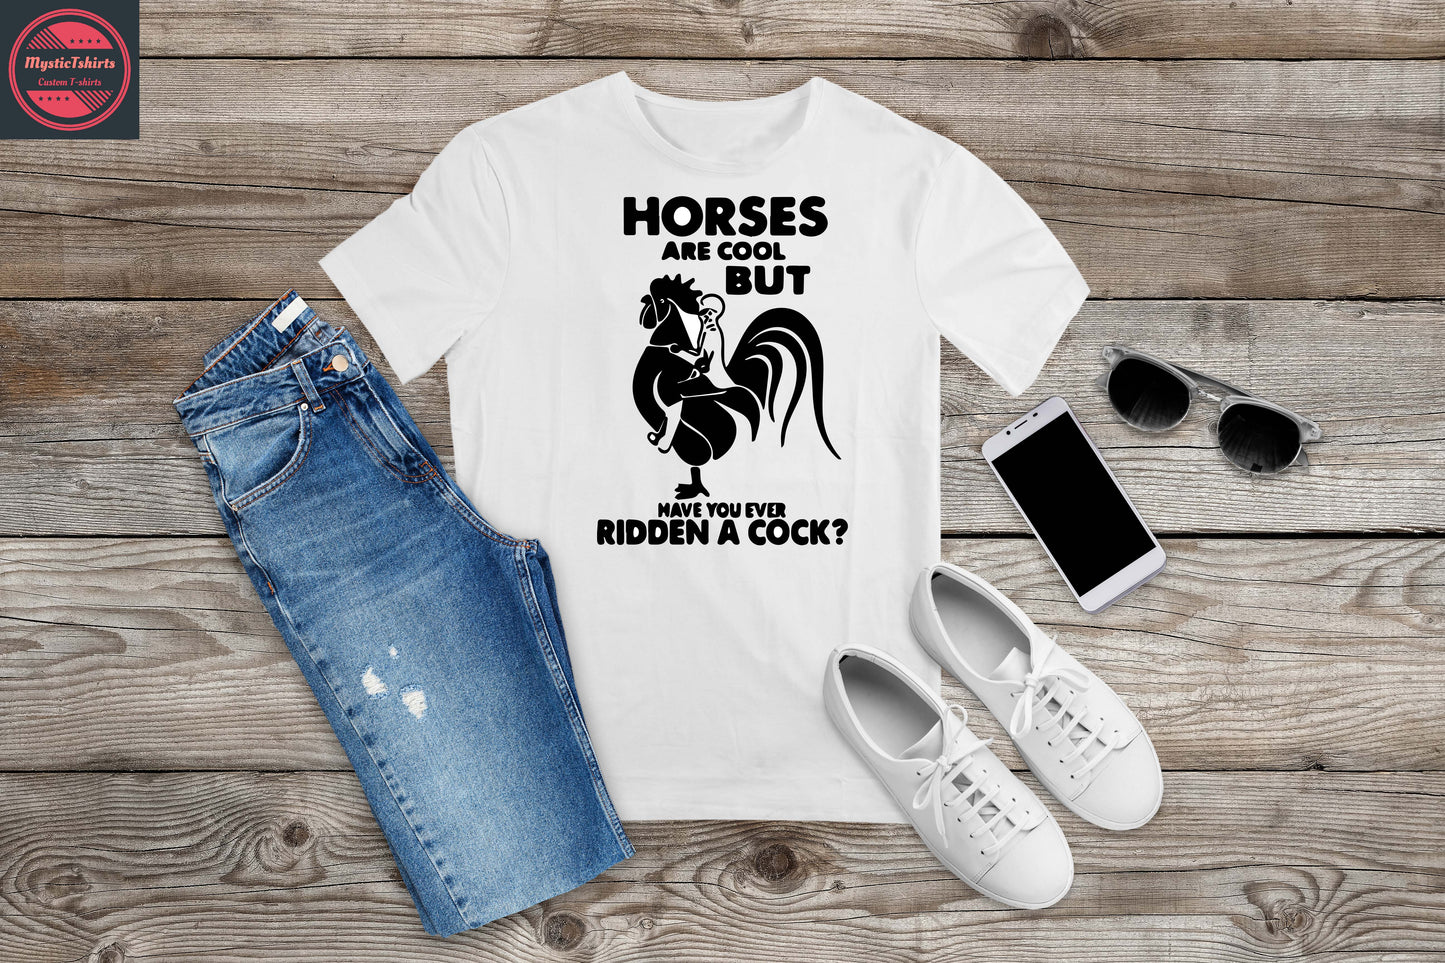 199. HORSES ARE COOL BUT, Custom Made Shirt, Personalized T-Shirt, Custom Text, Make Your Own Shirt, Custom Tee